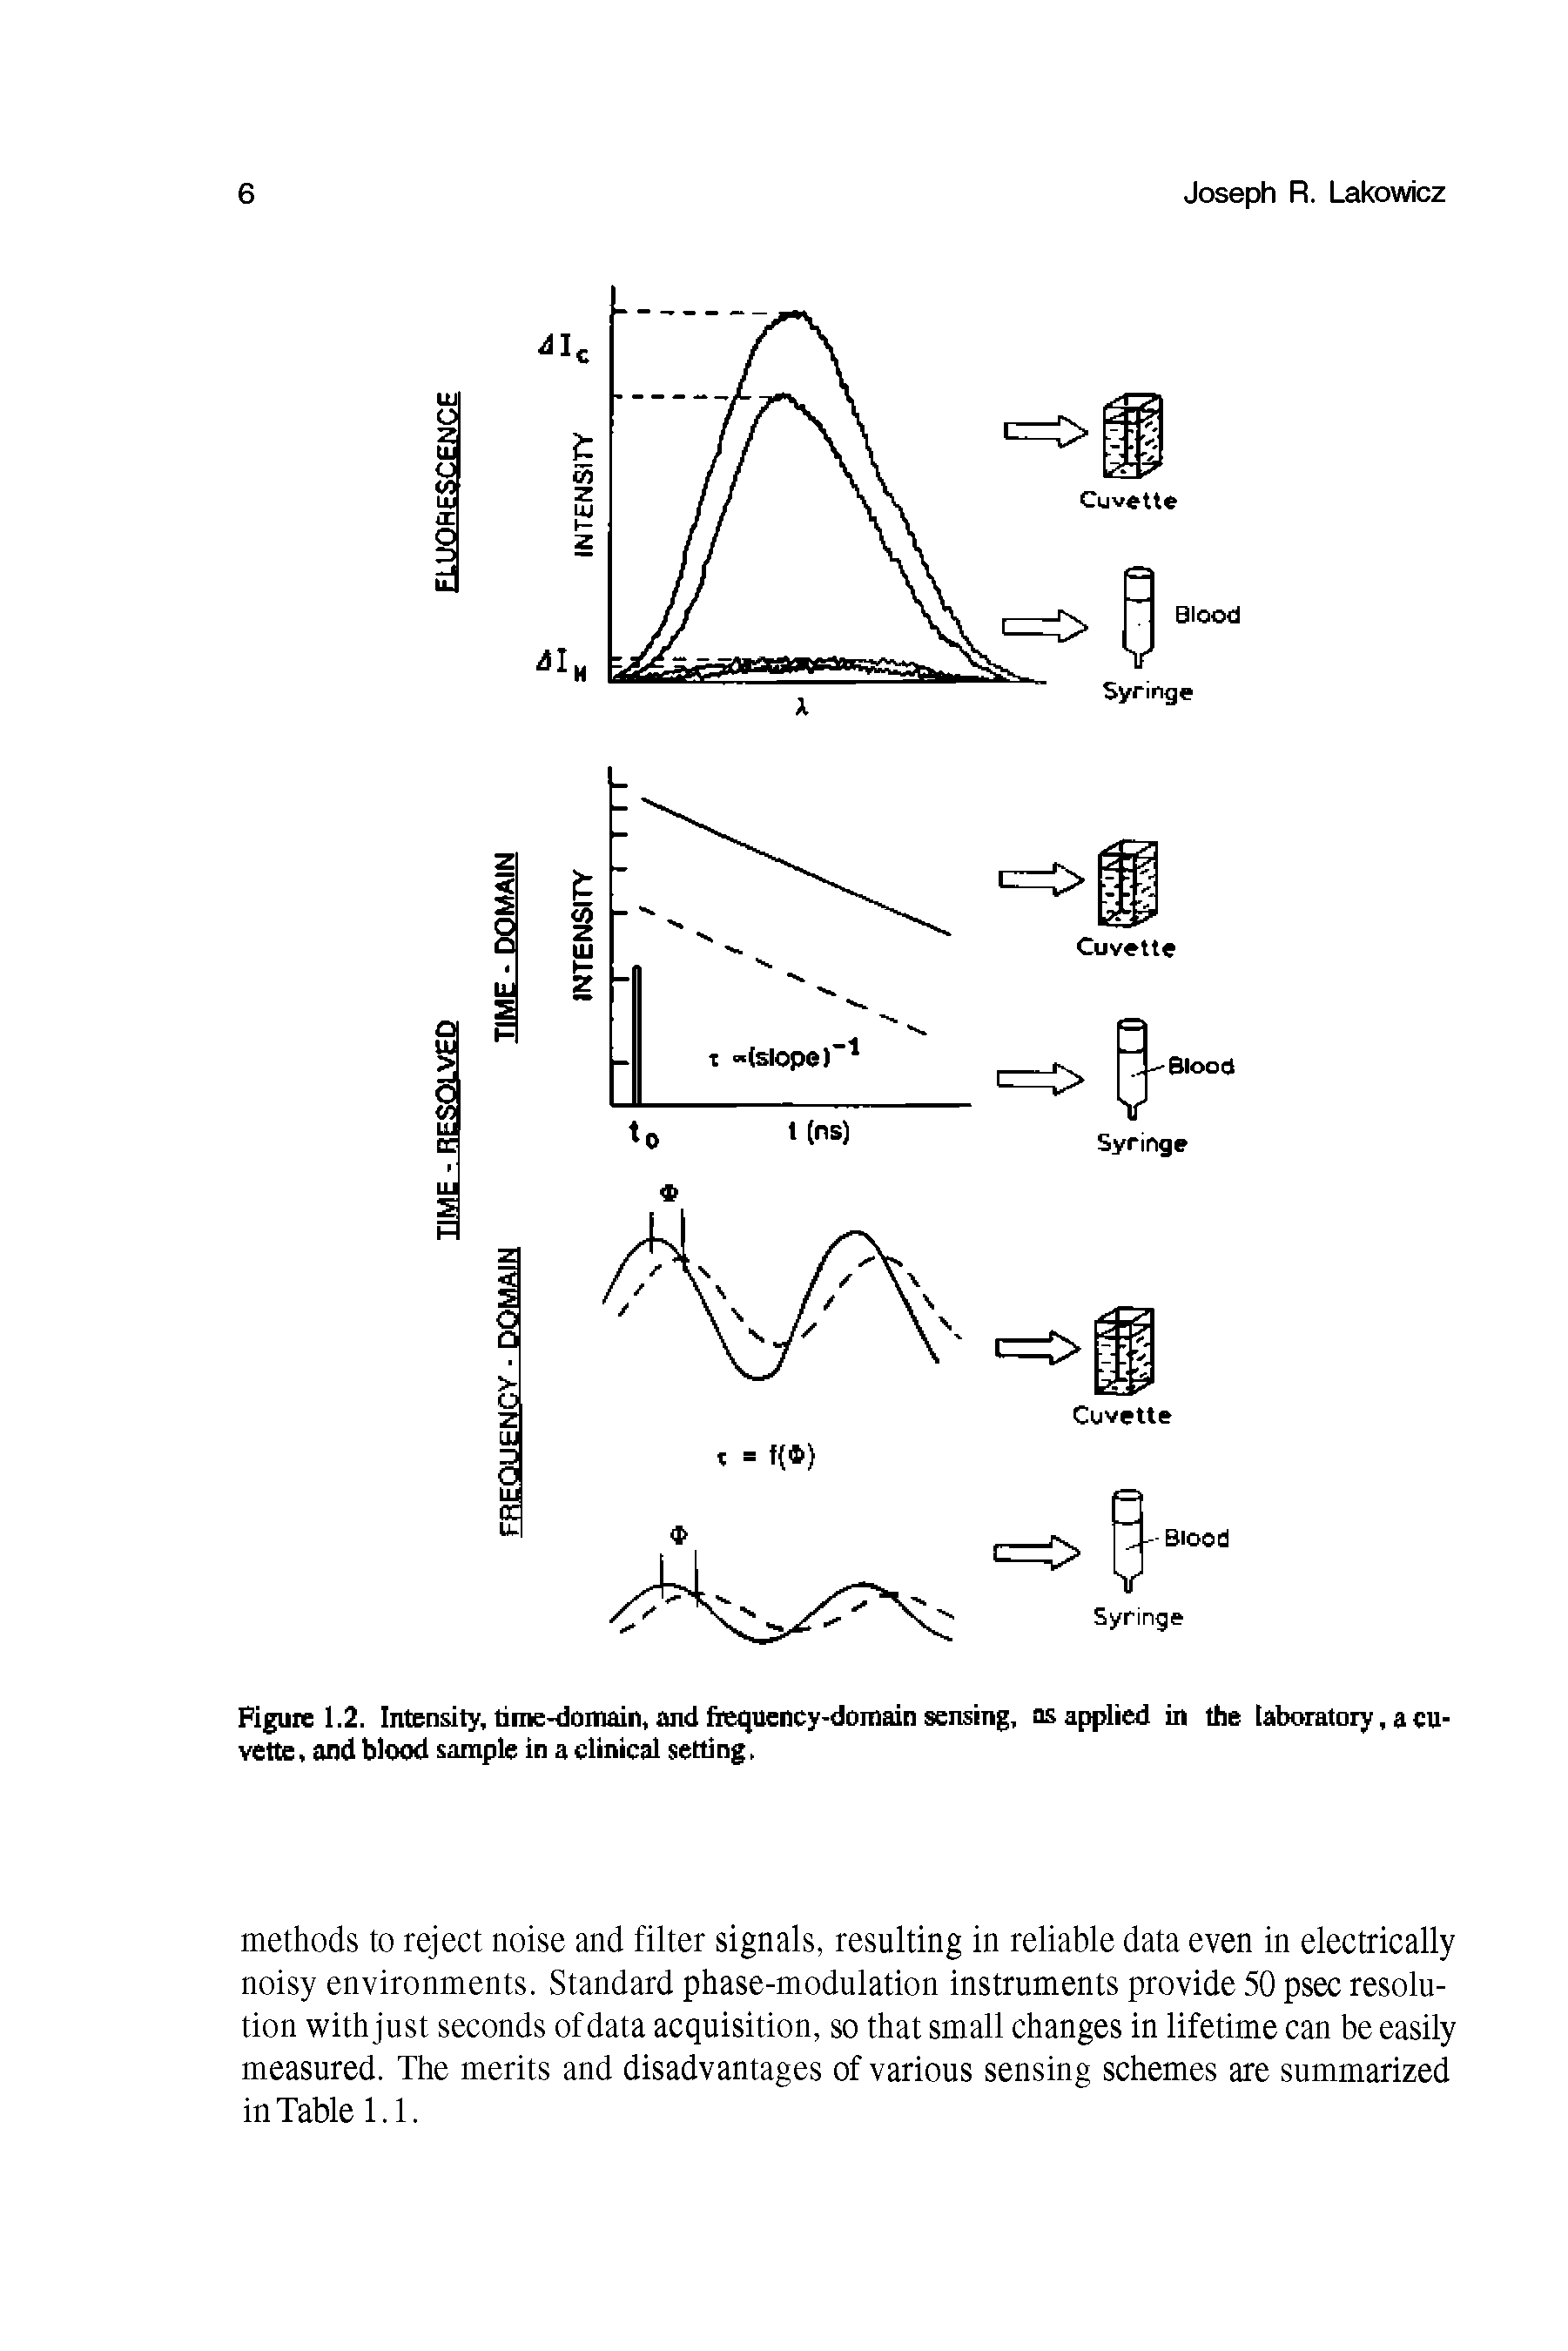 Figure 1.2. Intensity, time-domain, and frequency-domain sensing, as applied in the laboratory, a cuvette, and blood sample in a clinical setting,...